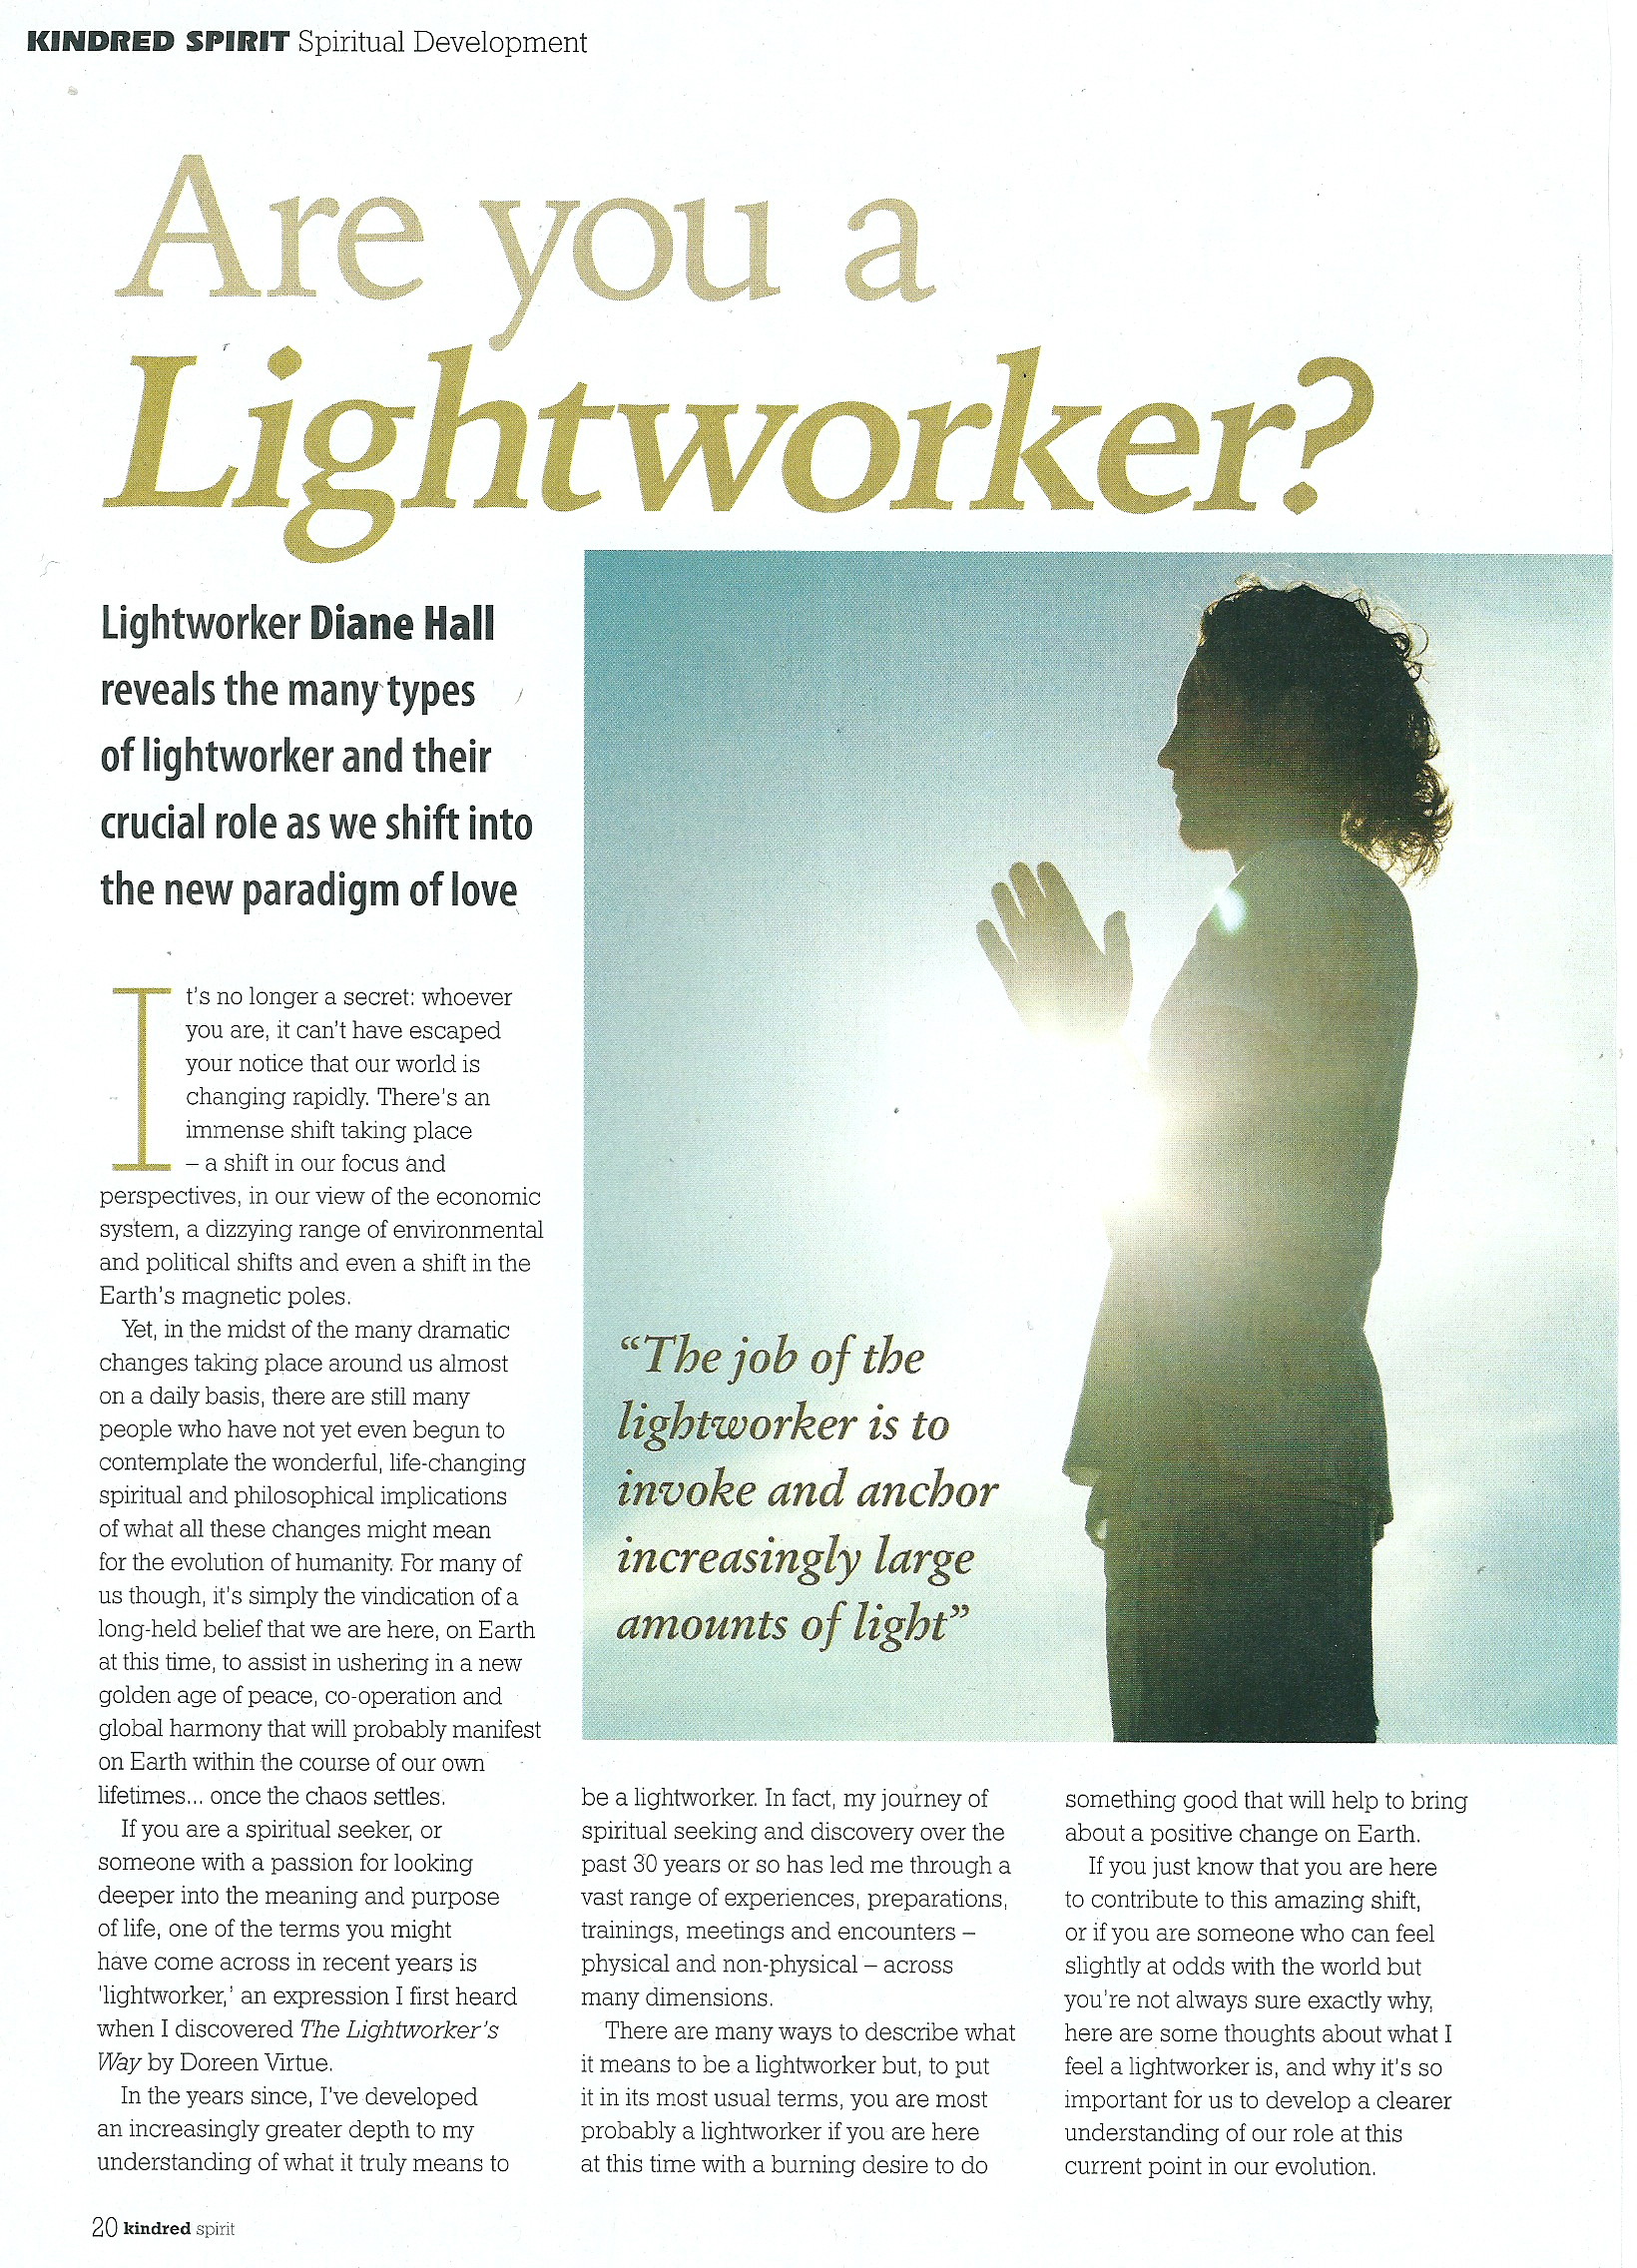 Are You a Lightworker?